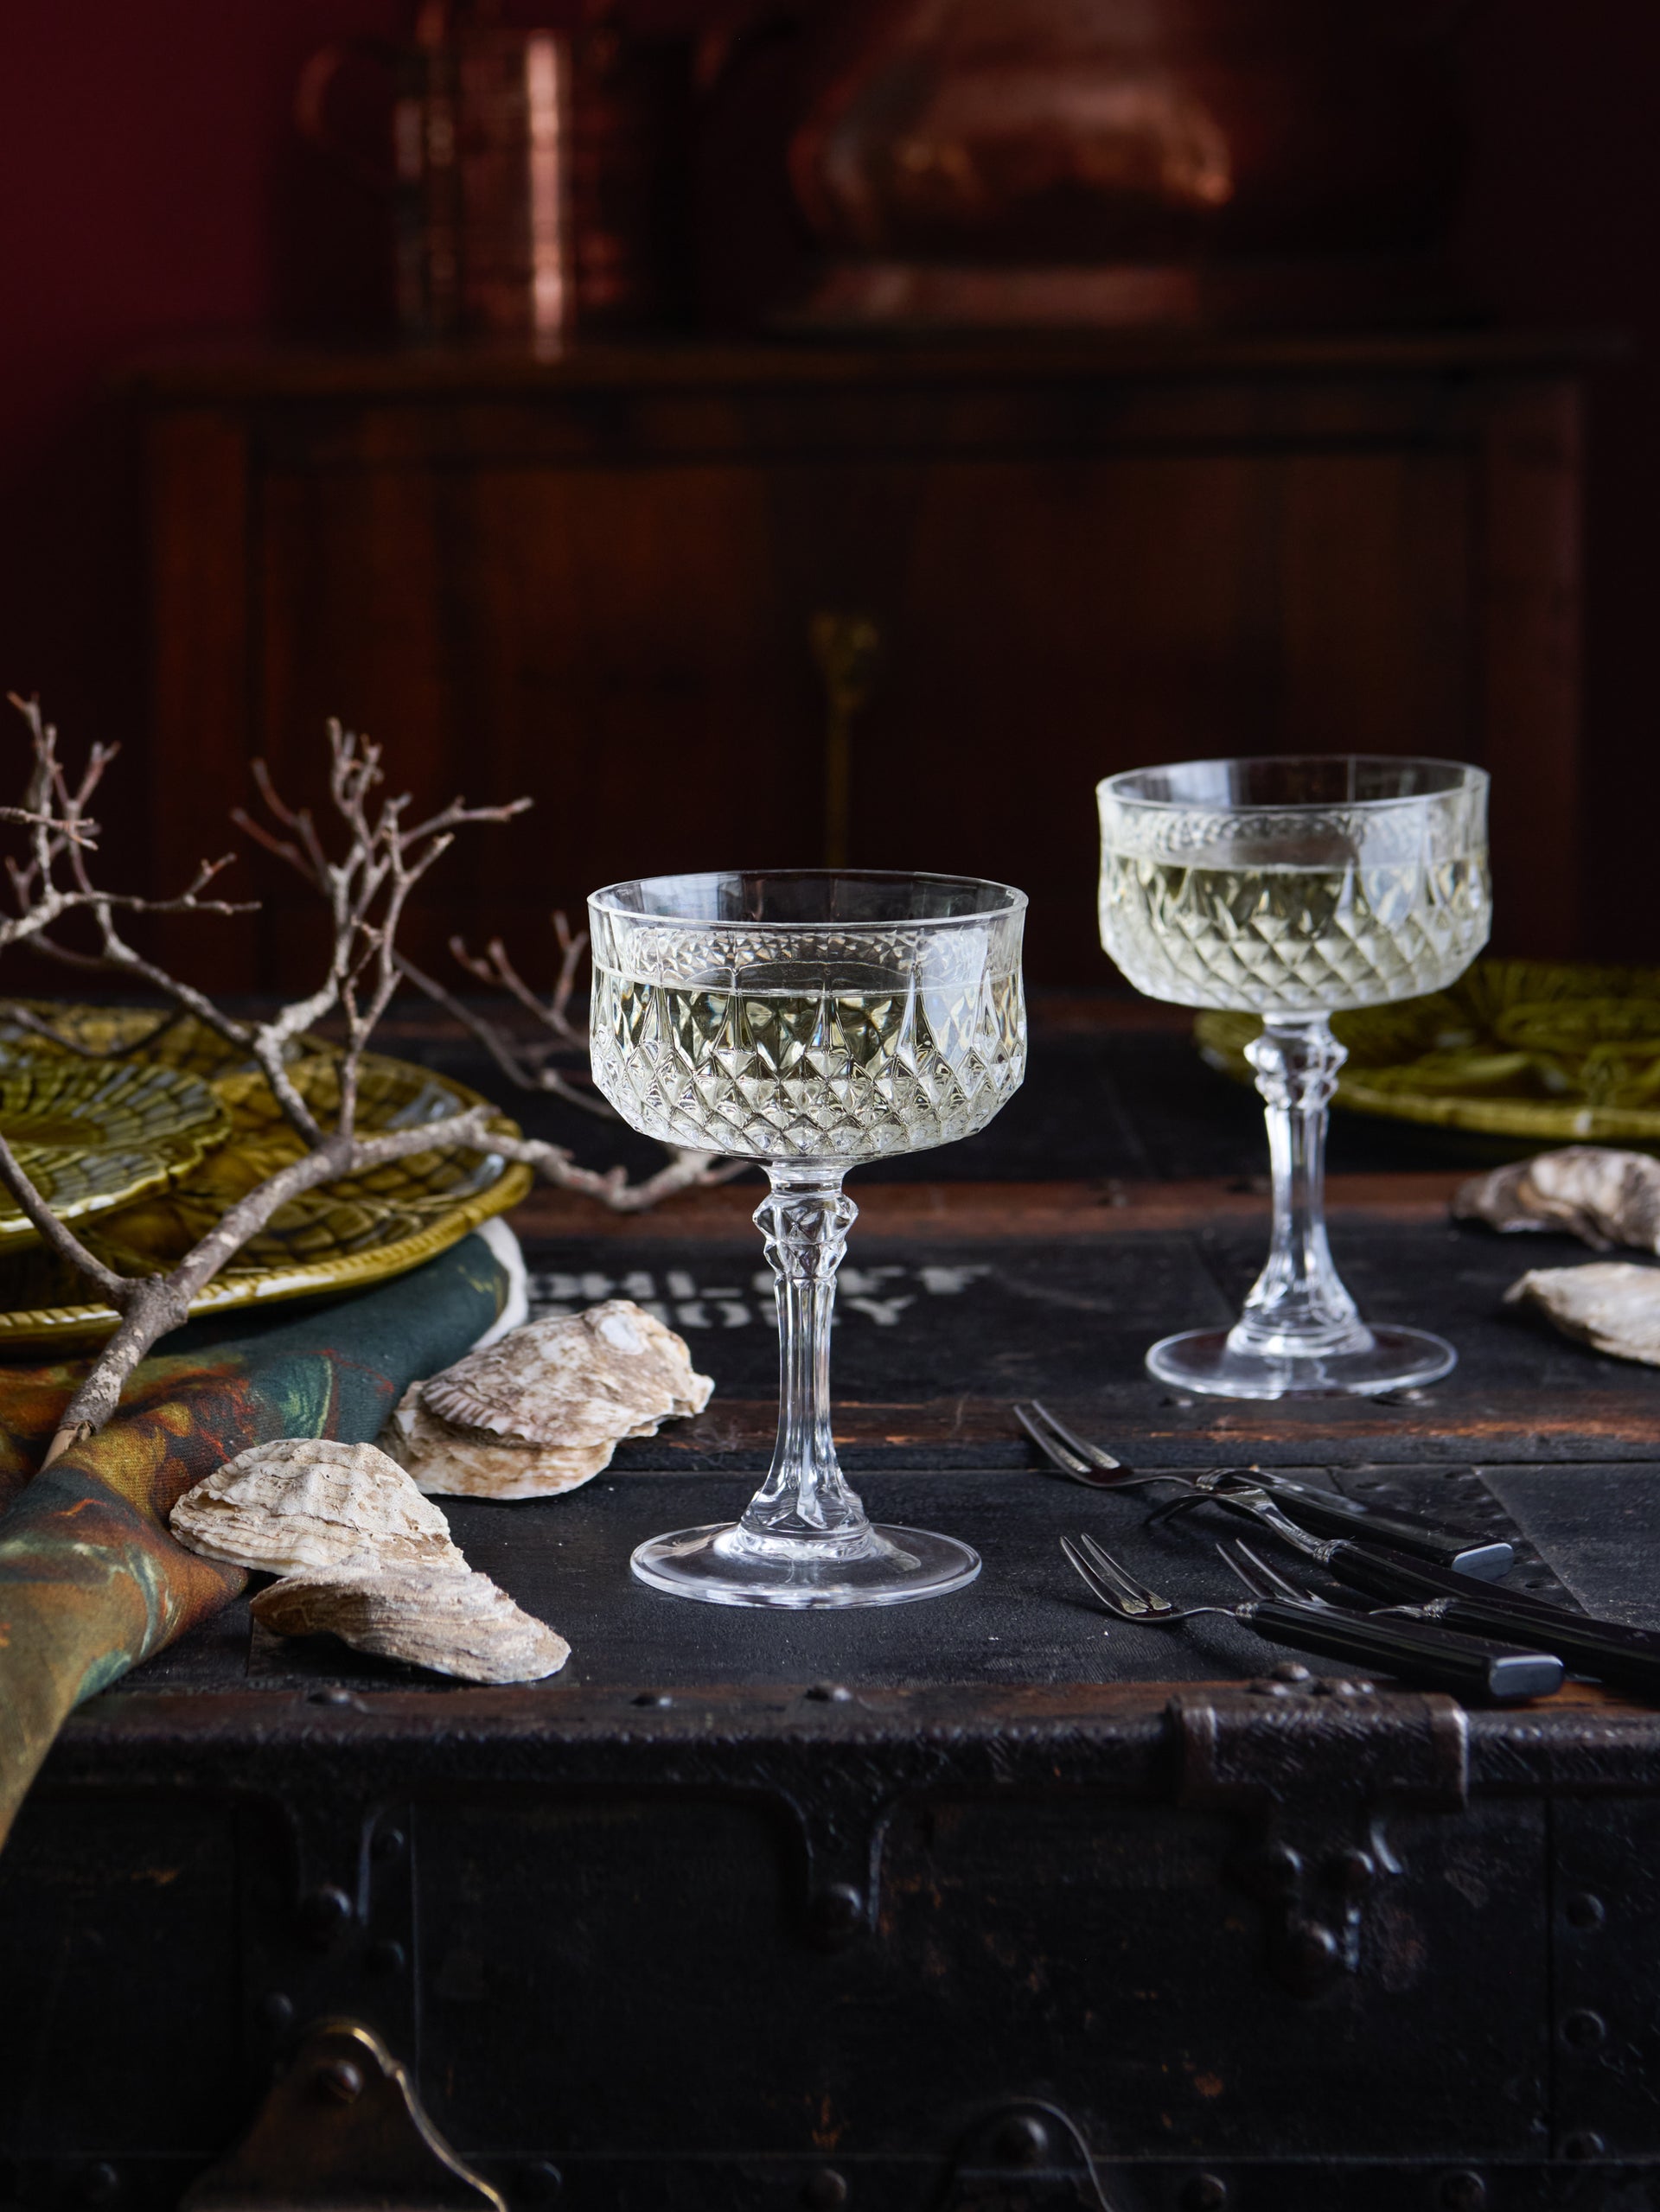 Shop the Vintage 1930s Fostoria Chintz Etched Crystal Wine Glasses at  Weston Table